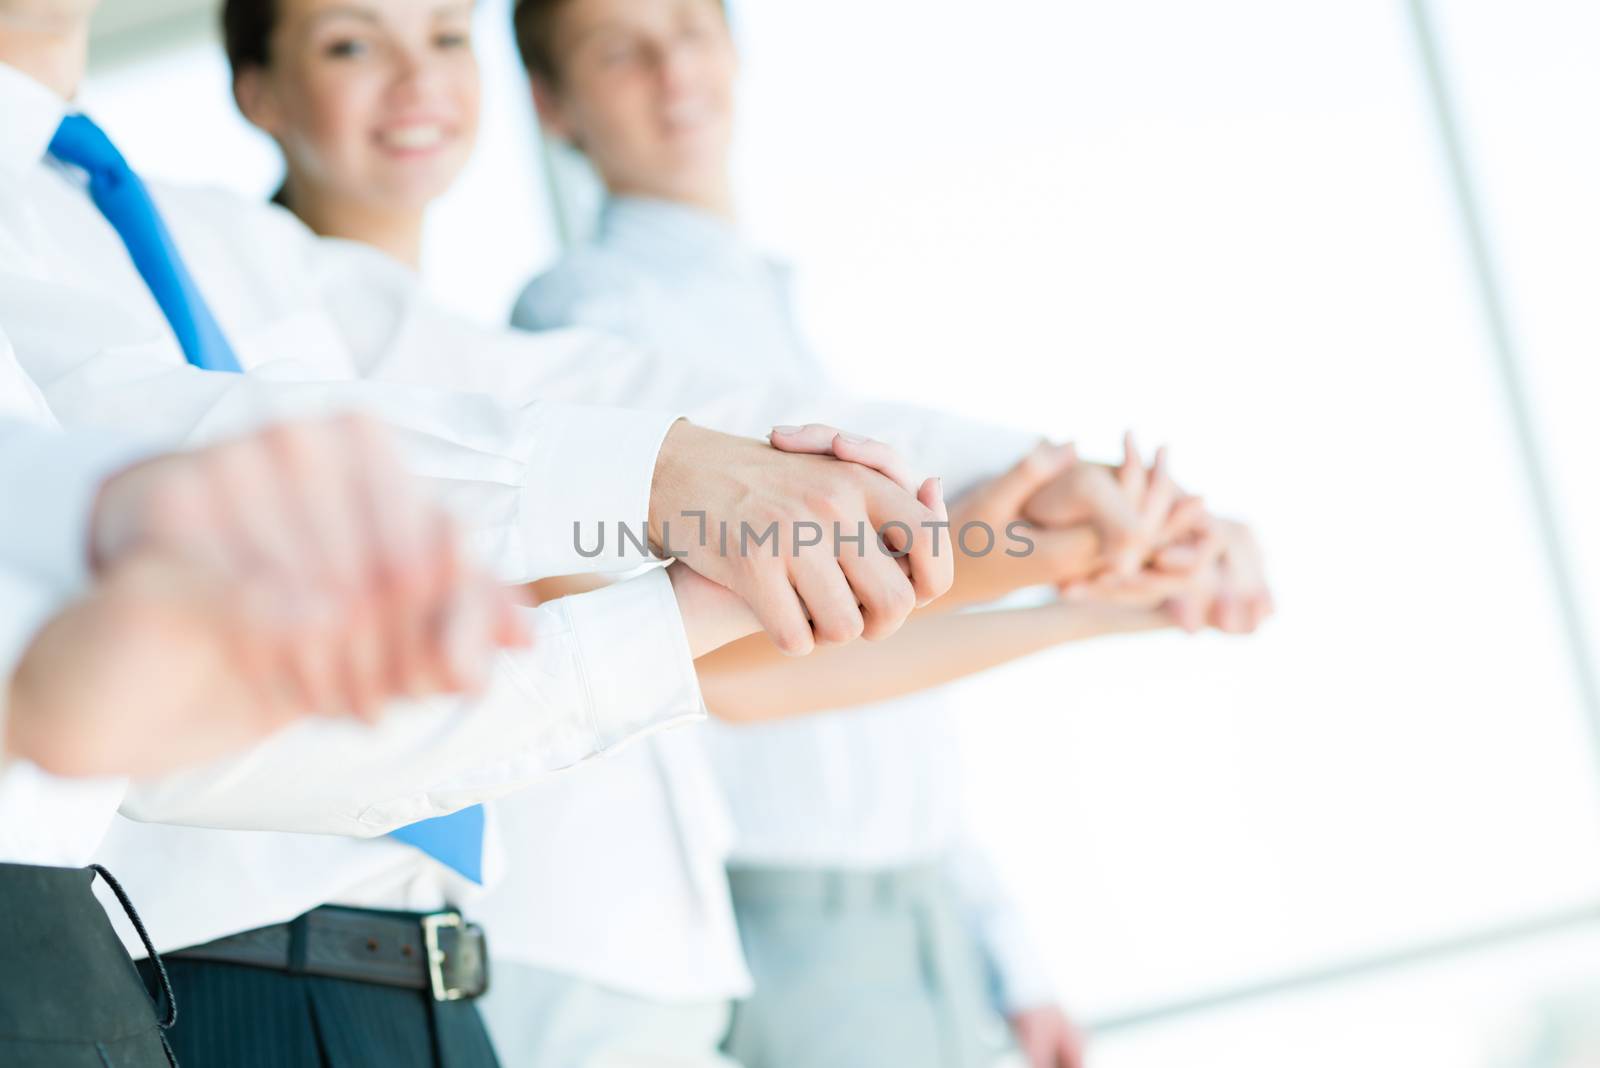 hands of businessmen, businessmen hold hands, stand in a row, the concept of teamwork